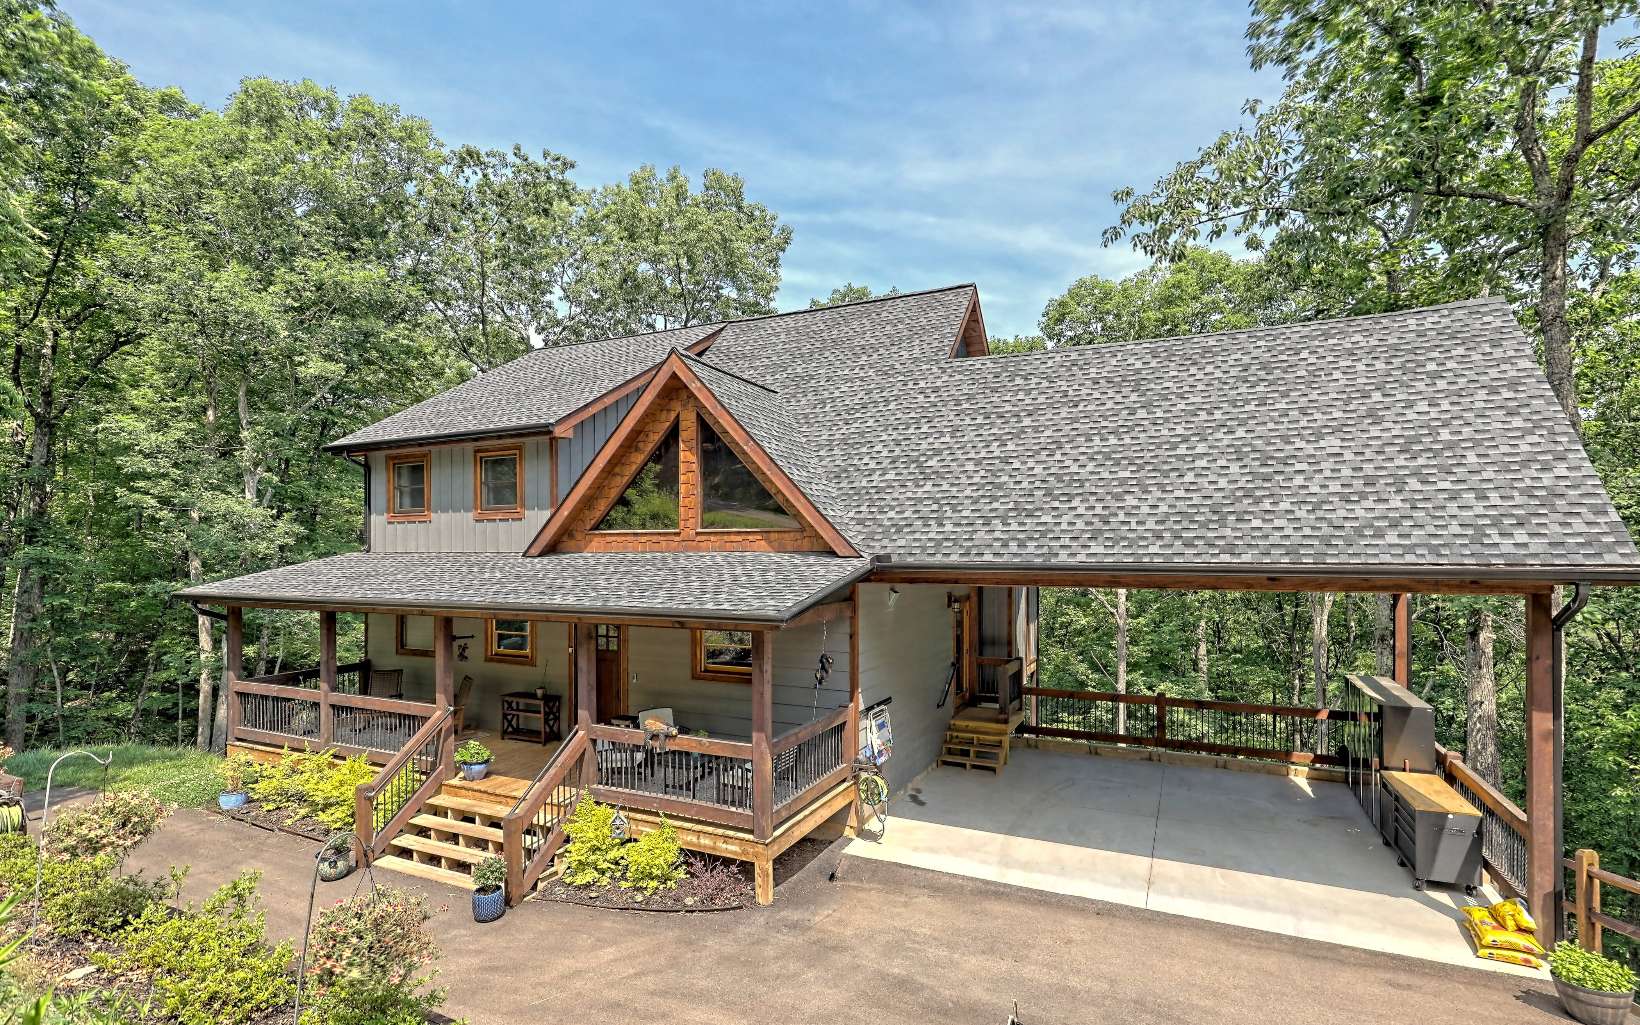 This Impressive Modern Rustic home is designed with stunning finishings in the Desirable Staurolite Mountain Gated Subdivision! This 4BR/3.5BA on 1.77 Acres is privately tucked away yet it is less than five minutes from downtown Blue Ridge. A wonderful entertaining home with an open Kitchen/living room area, custom cabinetry, granite countertops, stone gas log fireplaces, custom bathrooms and countless upgraded finishes. 2 levels of decks, screened porch and a full finished terrace level with a wet bar making it a great party area. This home has so much more to Offer! Call me today!